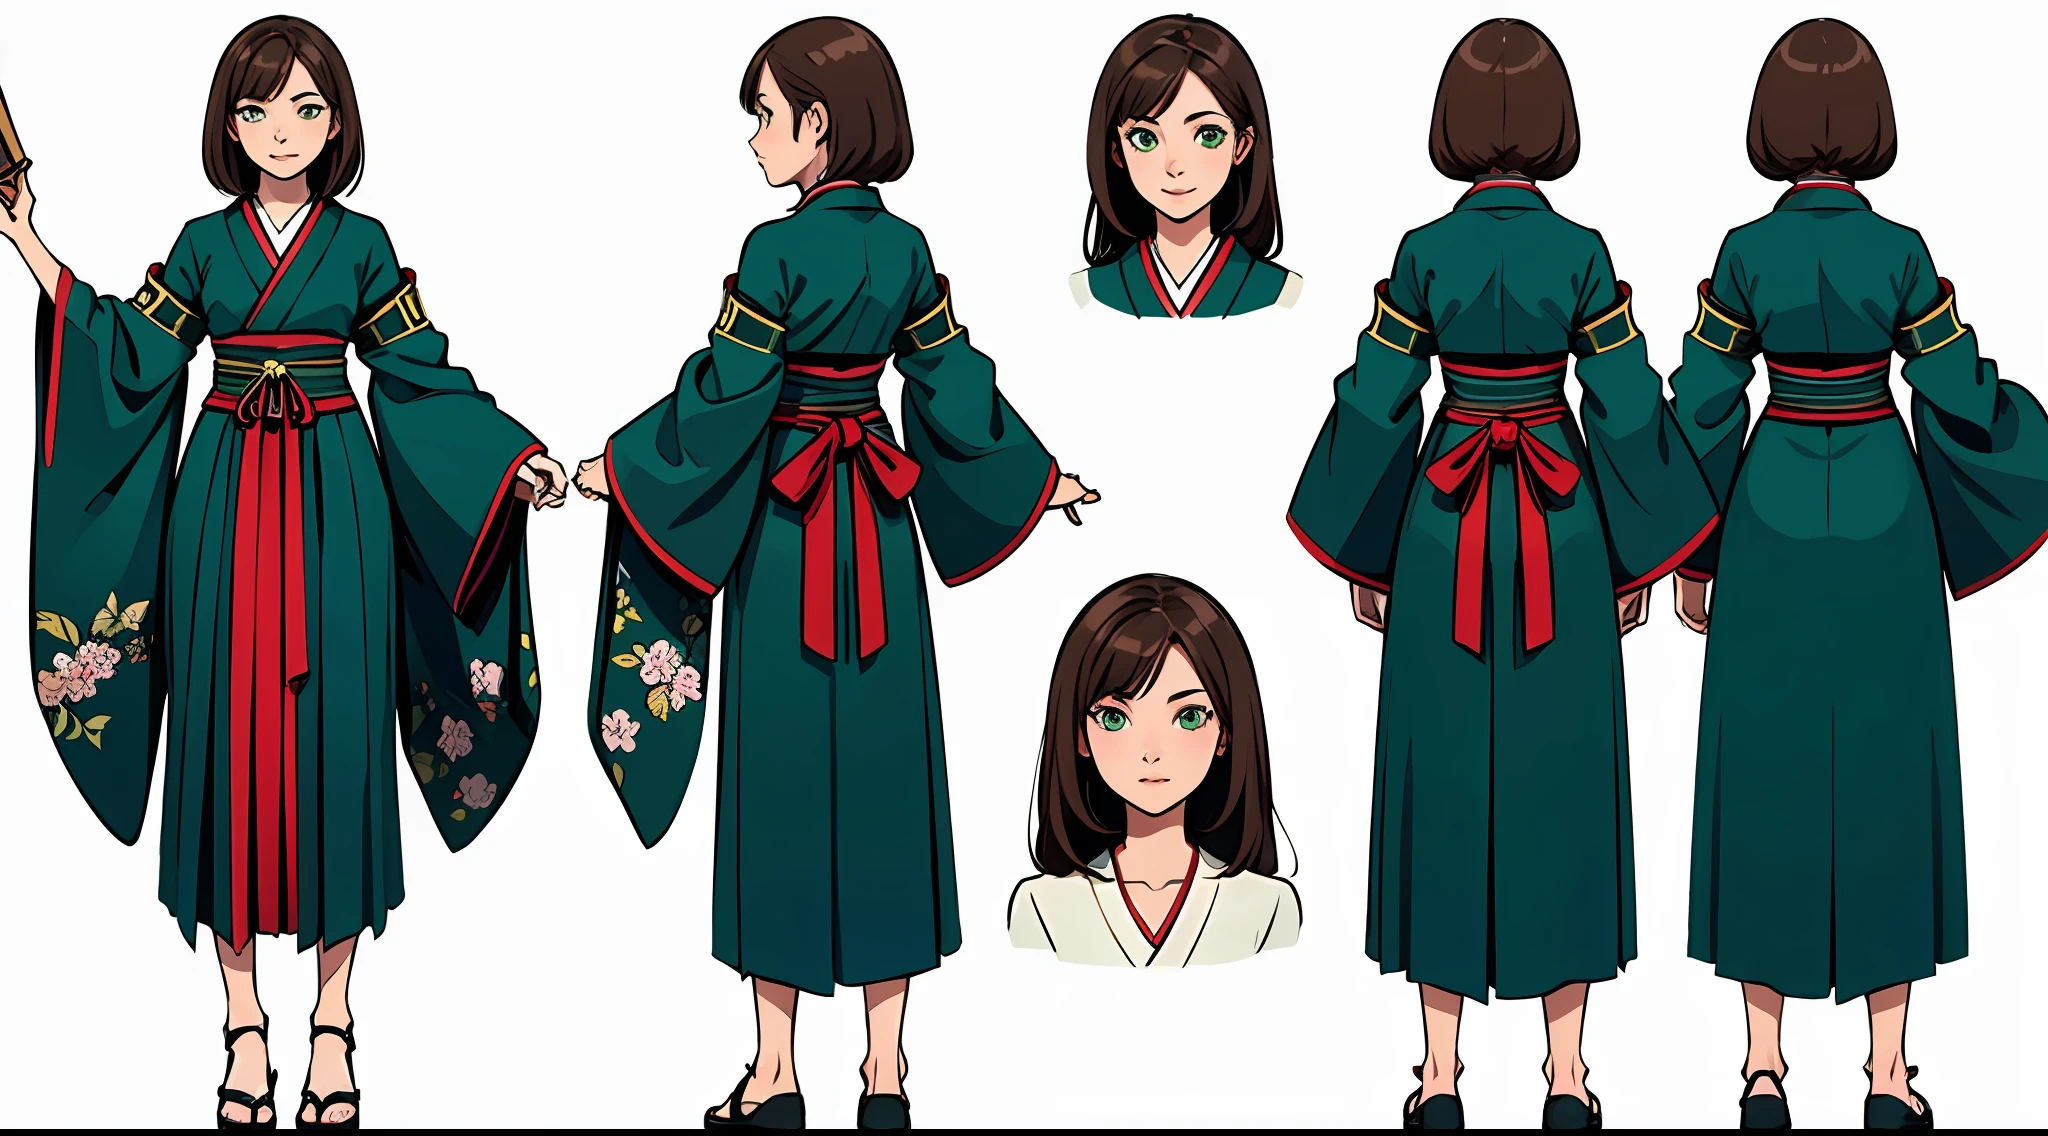 (masterpiece), best quality, (character design sheet, same character, full body, side, back), illustration, (beautiful detailed hair detailed face), 1 girl, solo, perfect feminine face, very stunning woman, pose zitai, detailed design character, chesnut brown hair, left sided bangs, shorr length hair, green eyes, traditional hakama samurai kimono, (simple background, white background: 1.3)